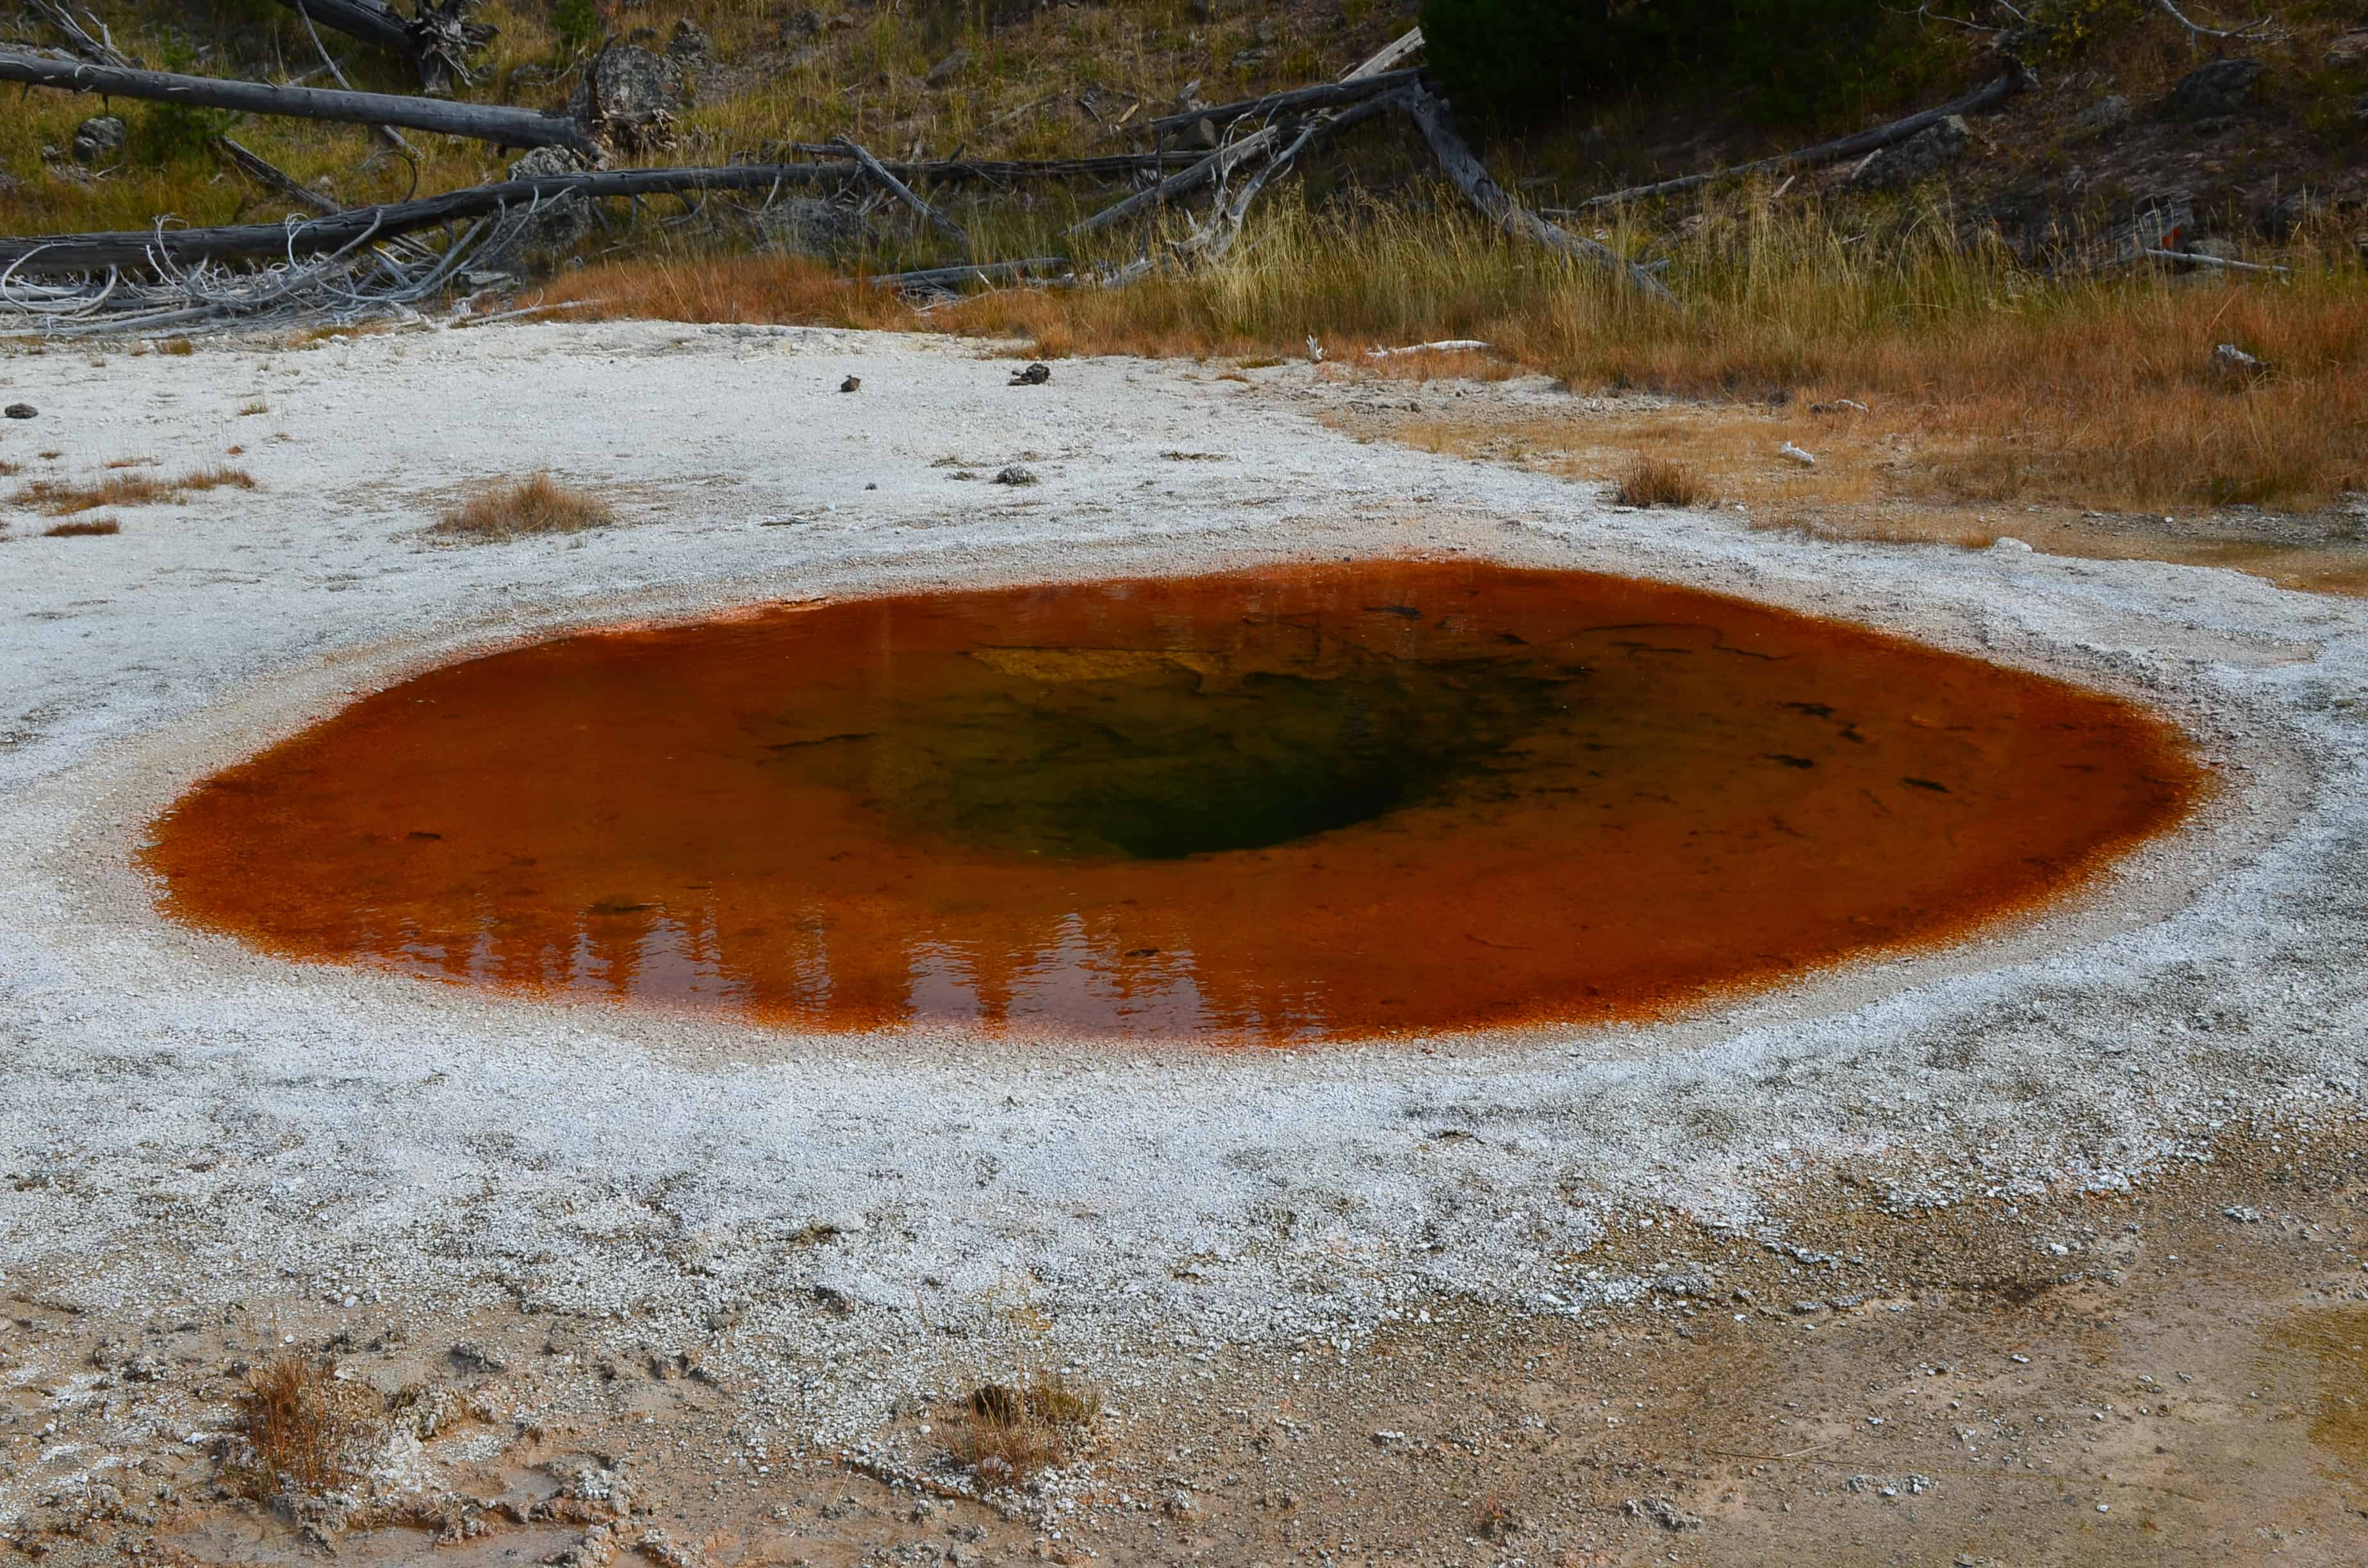 Wave Spring at the Upper Geyser Basin in Yellowstone National Park, Wyoming